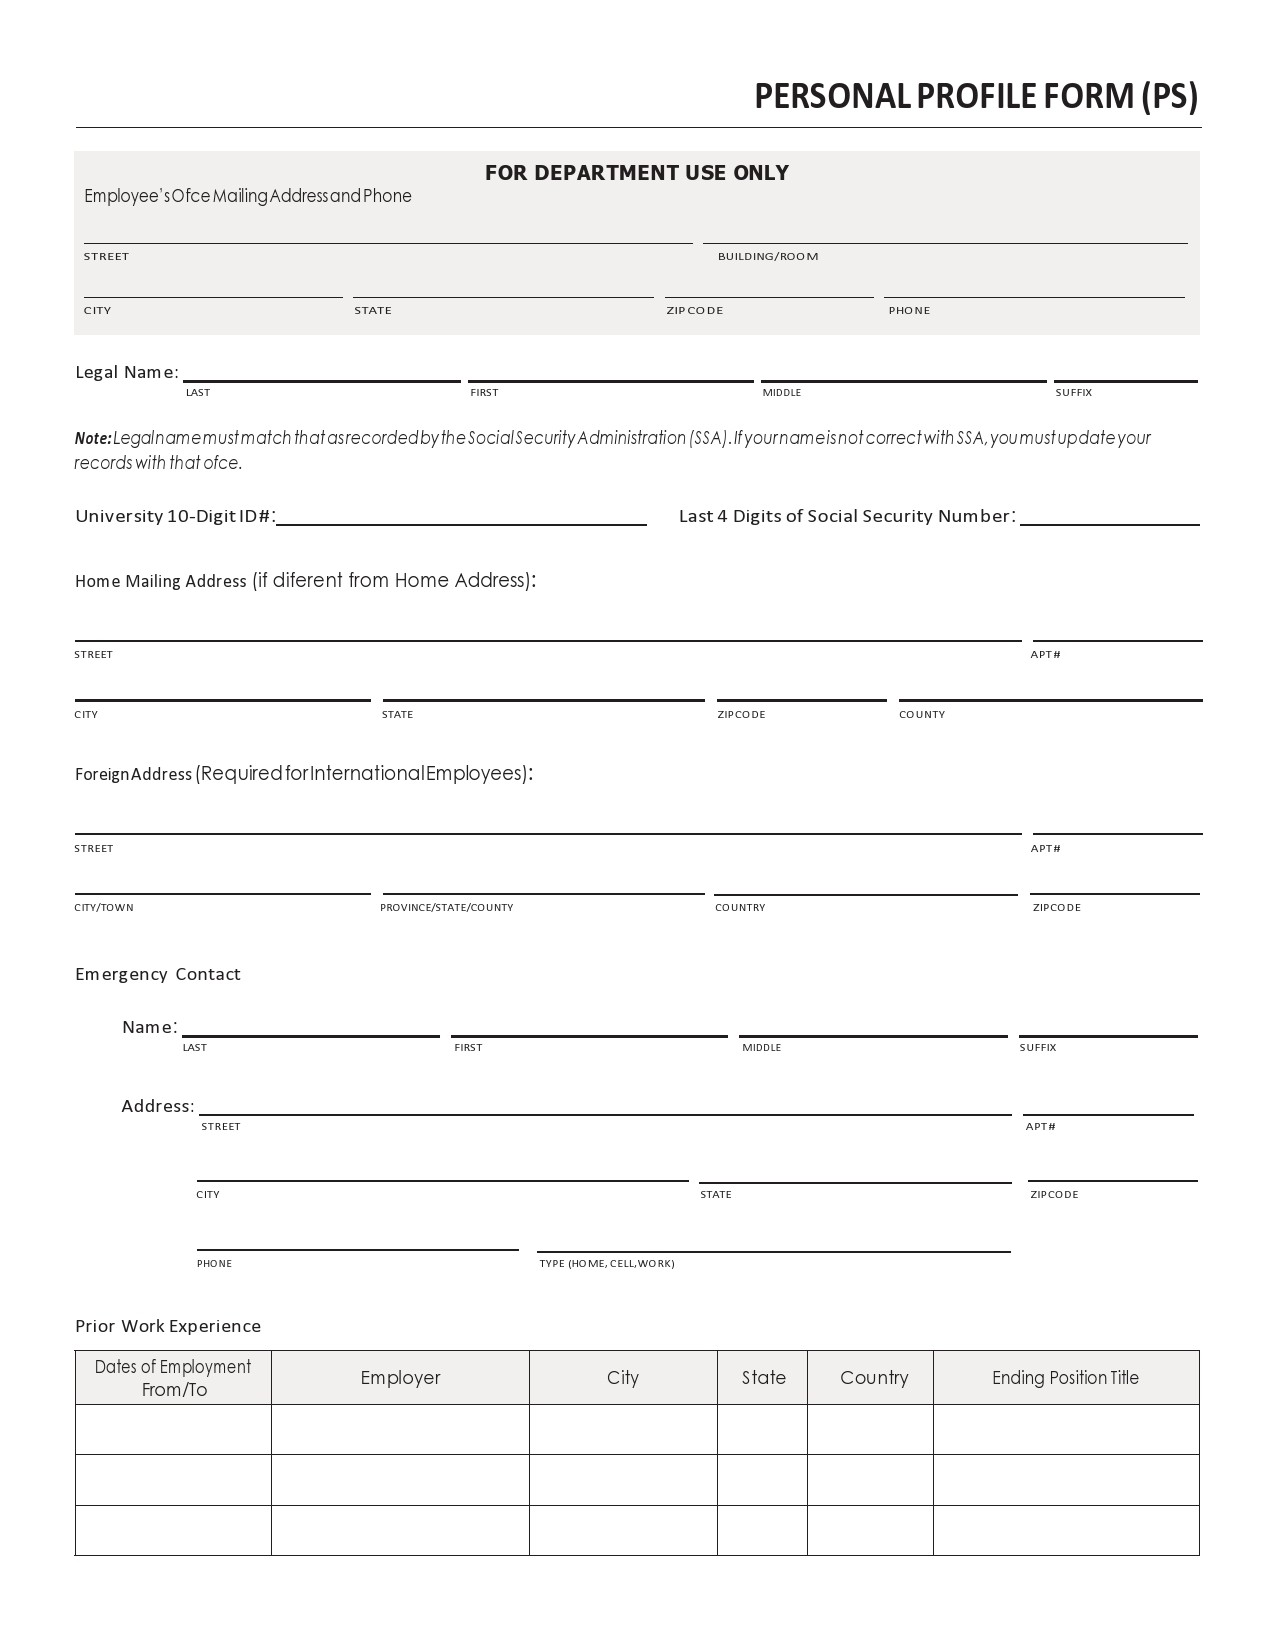 Free personal information form 20